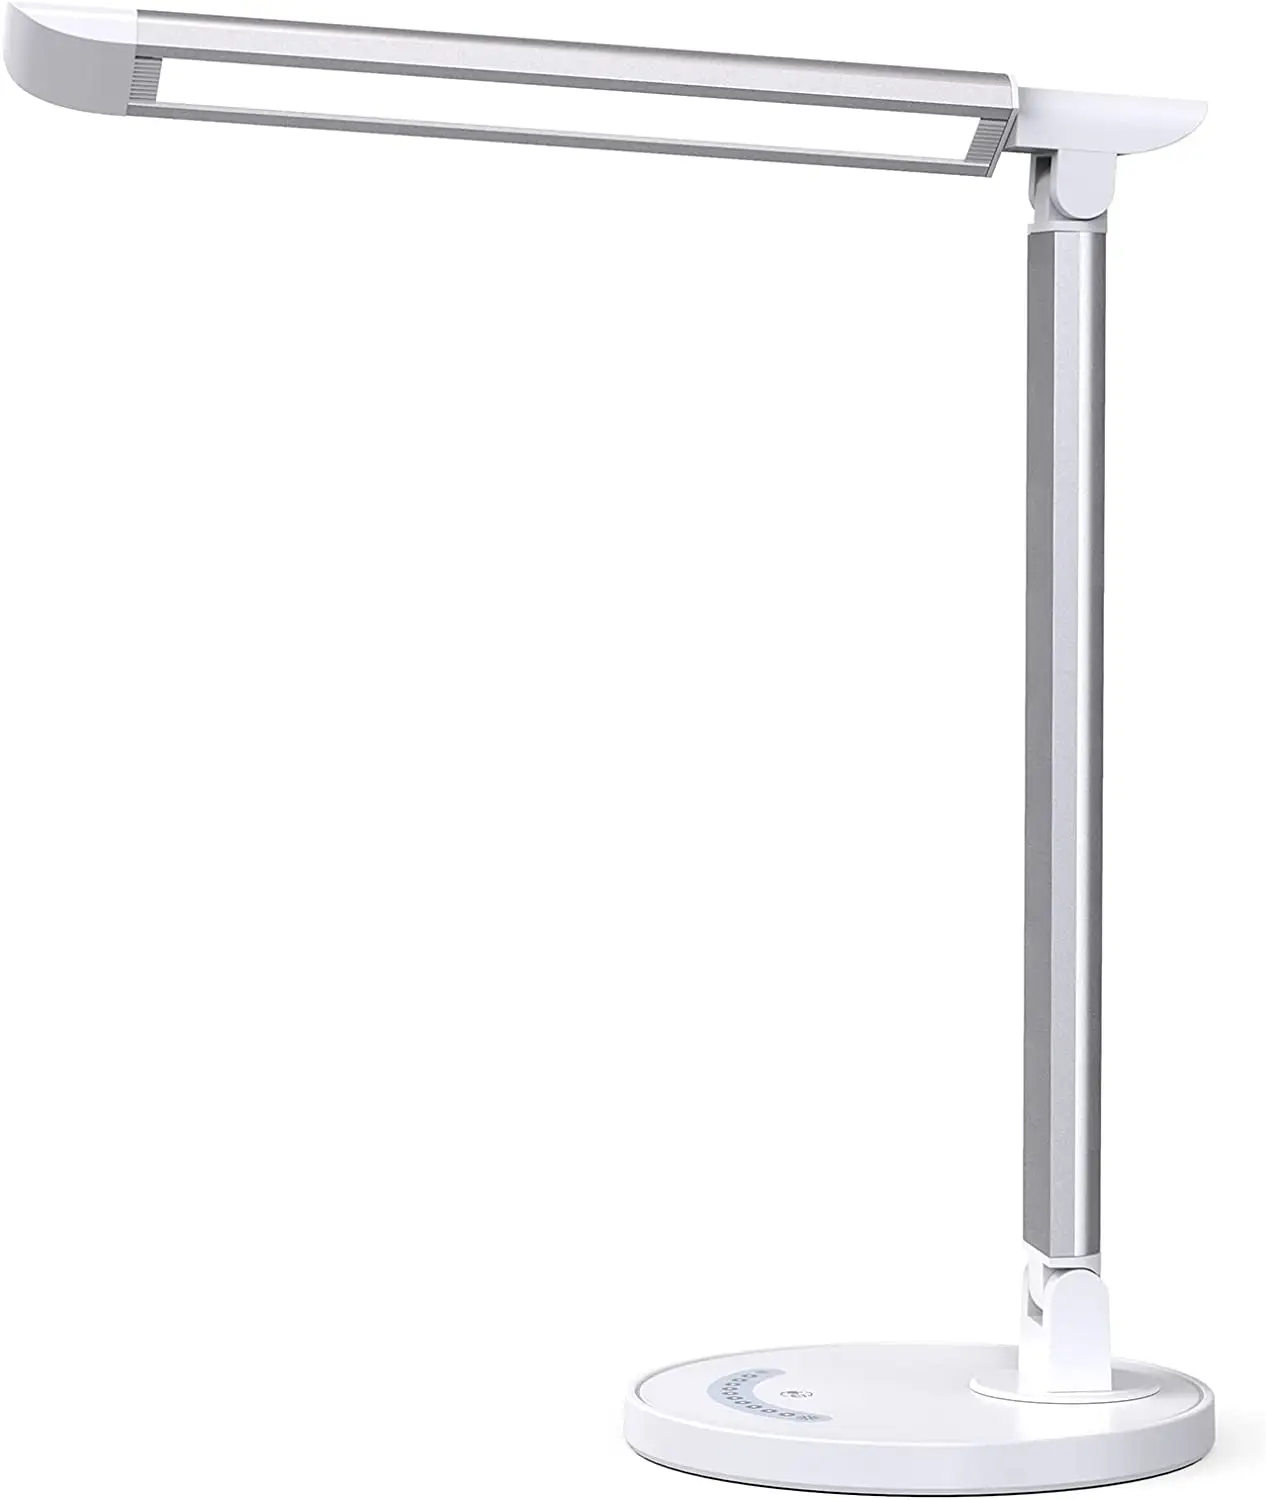 Eye-Caring LED Desk Lamp with USB Charging Port, 5 Lighting Modes with 7 Brightness Levels, Touch Control